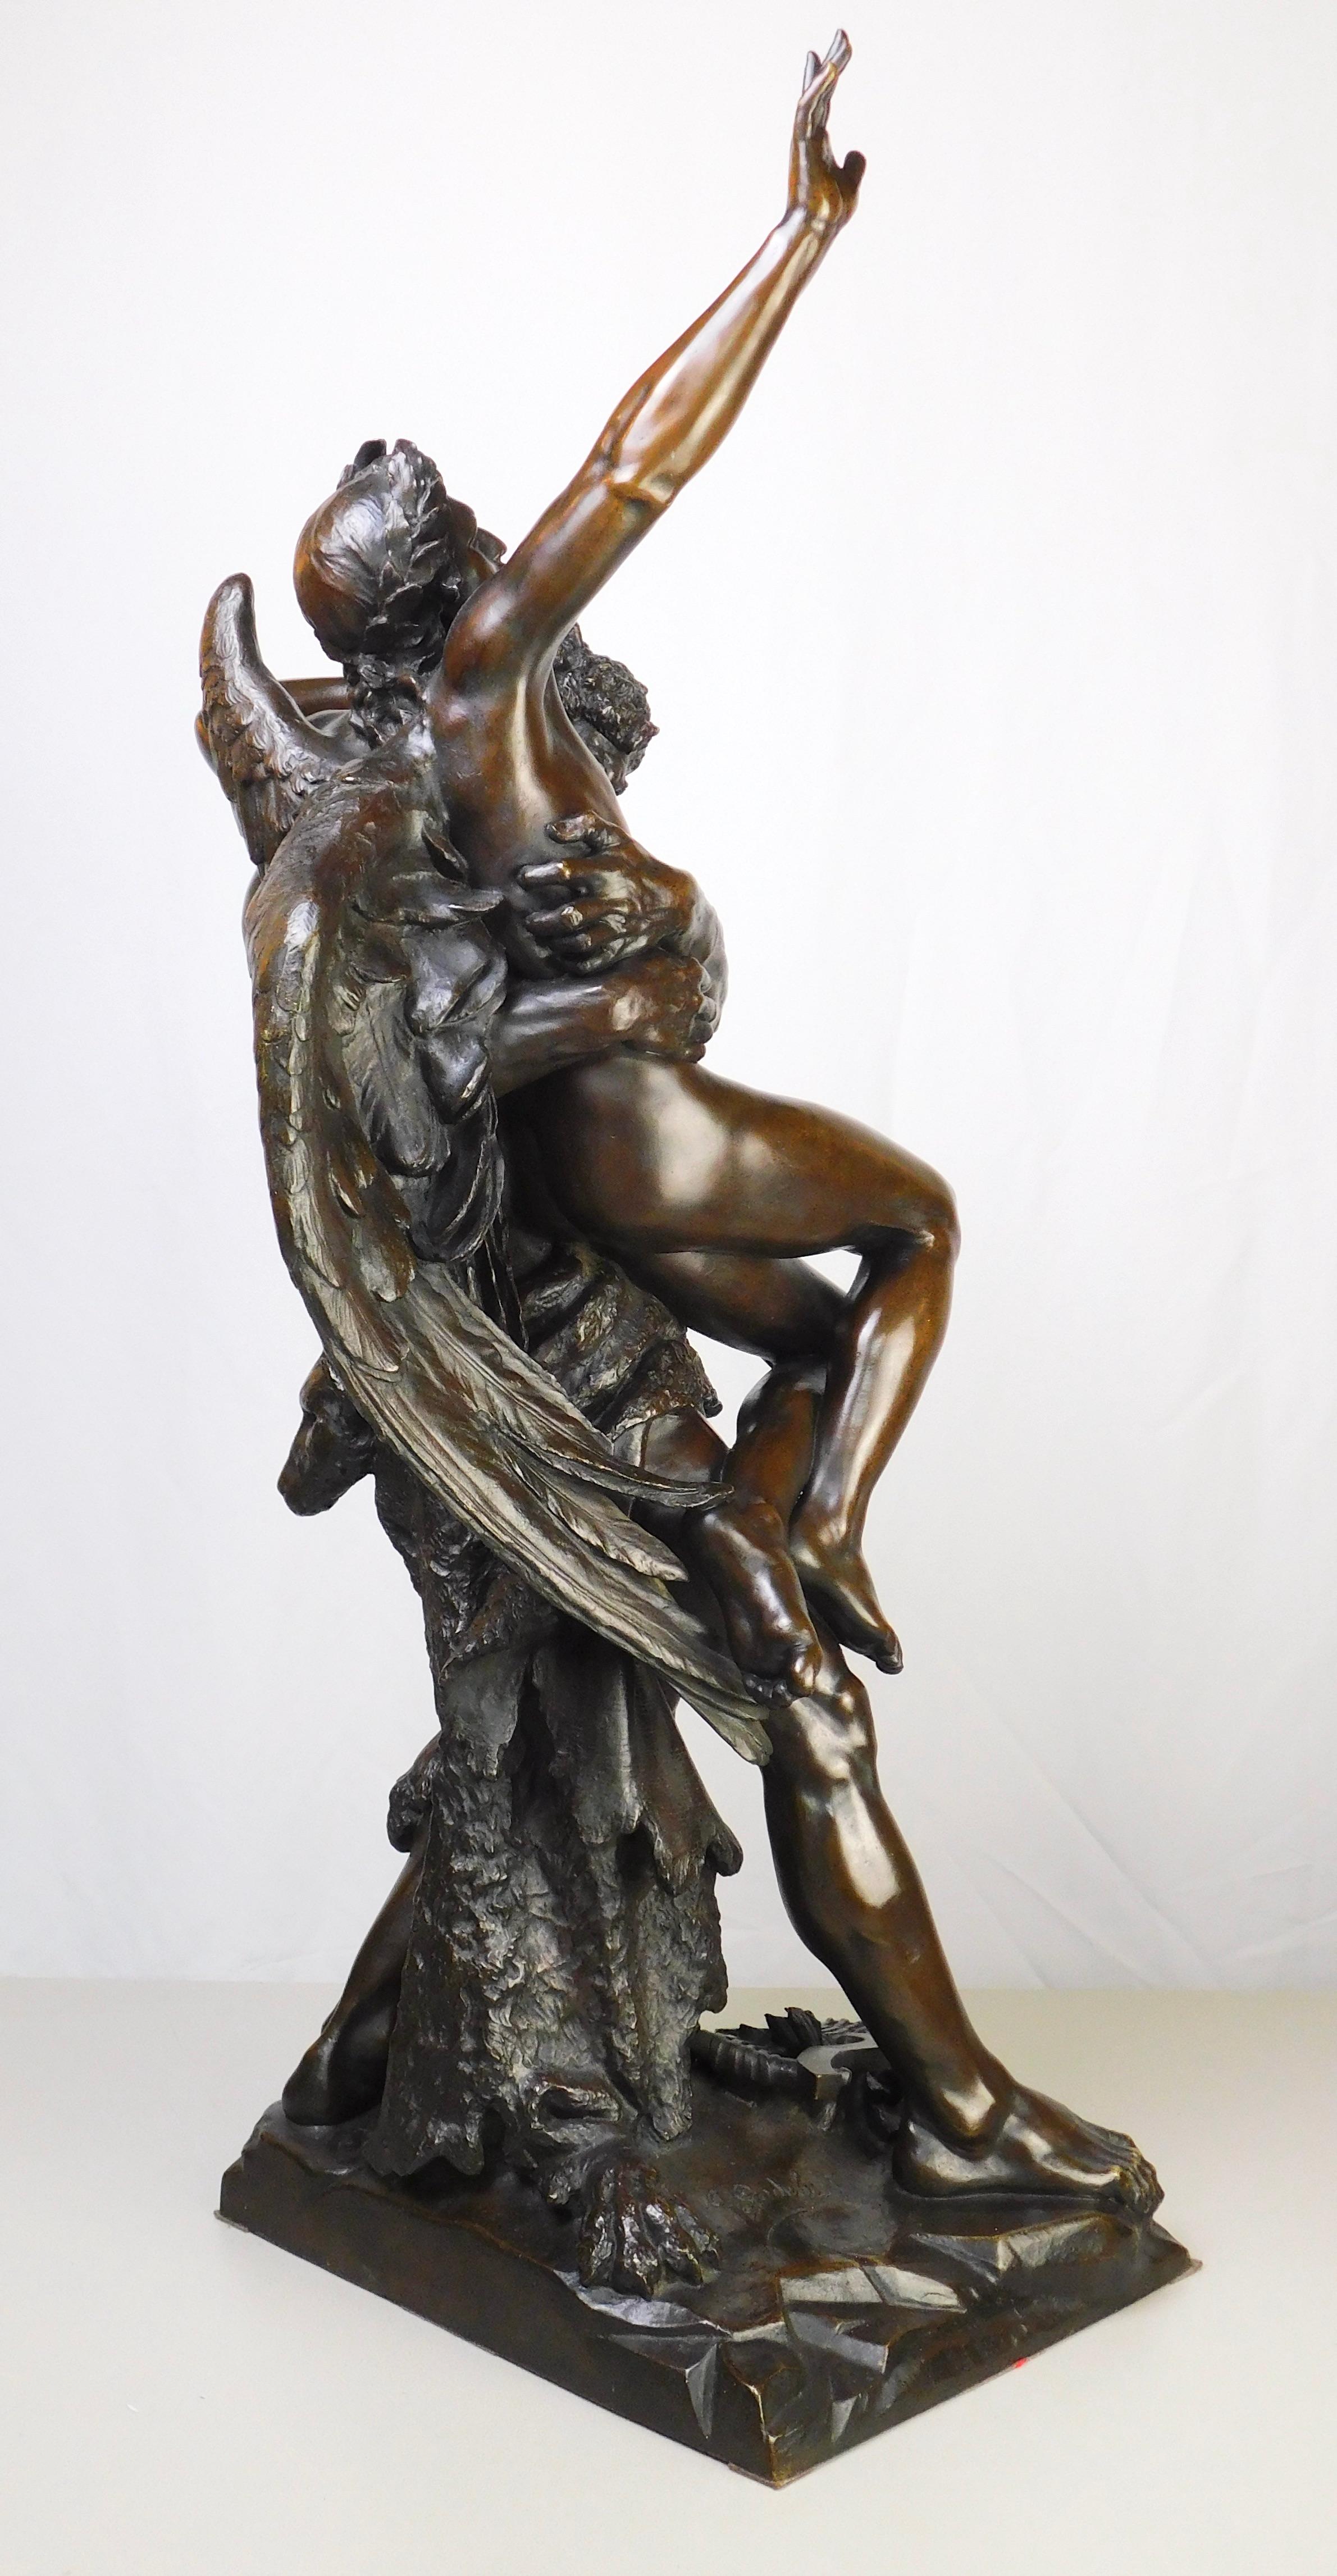 Polish Antique Bronze Sculpture Genius and Brute Force by Cyprien Godebski For Sale